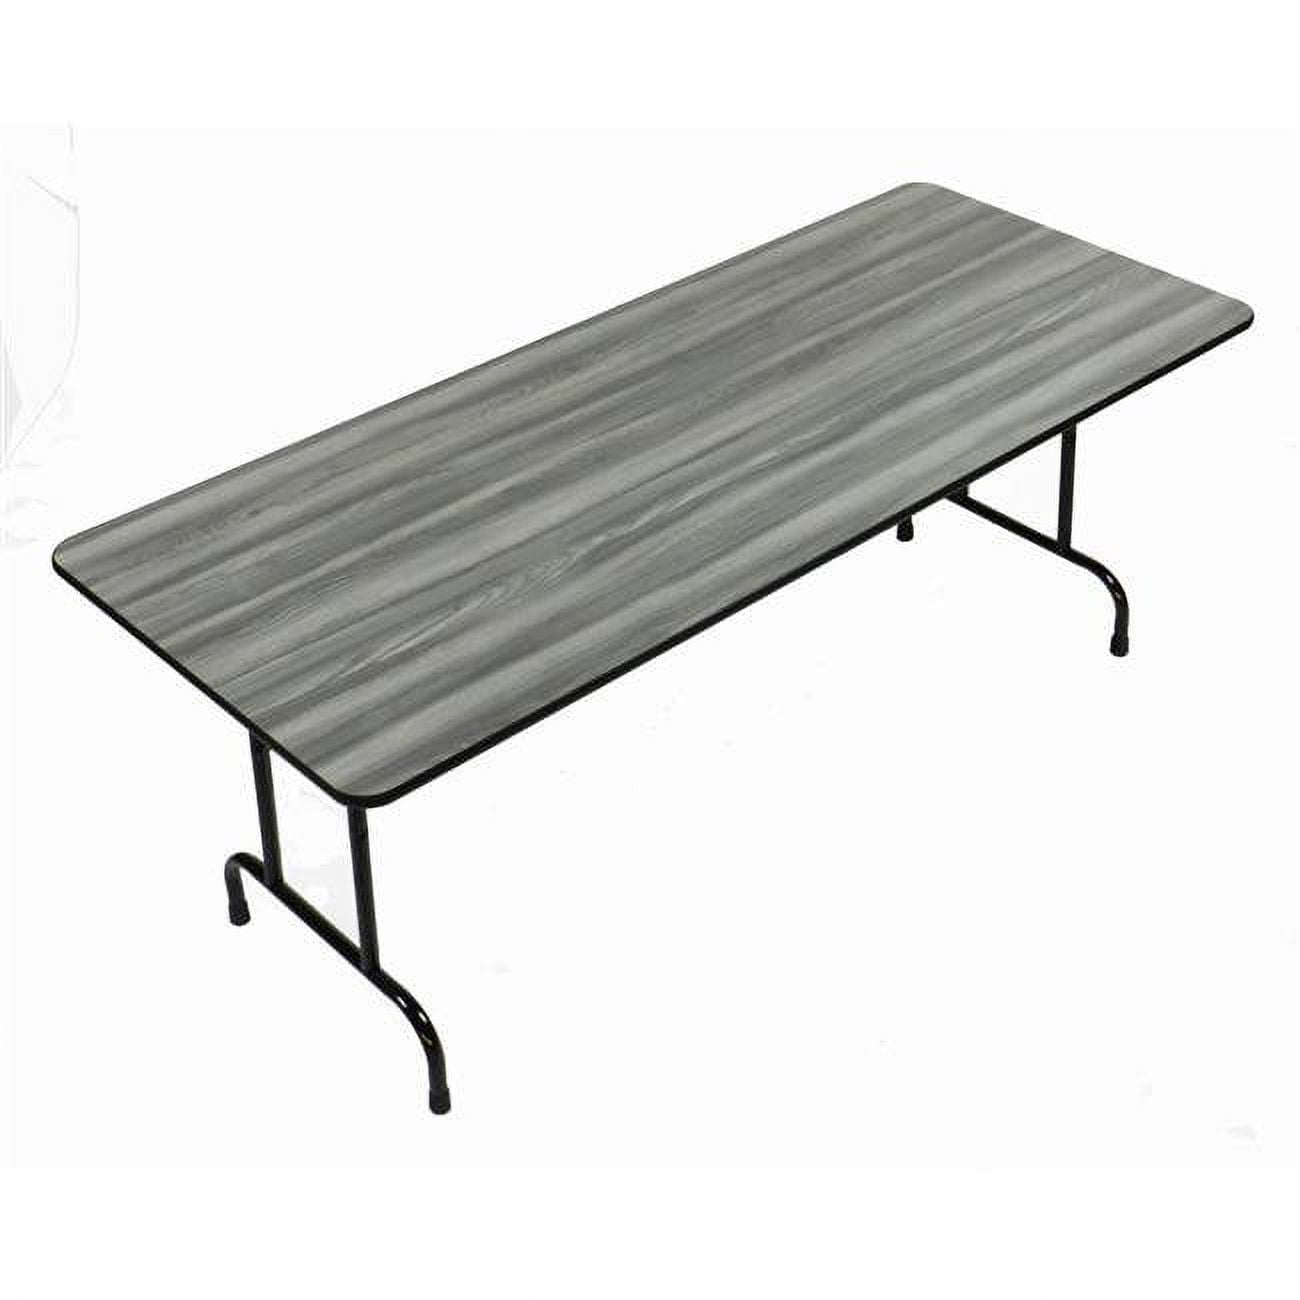 Cf2460px-52 0.75 In. High Pressure Rectangular Top Folding Tables, New England Driftwood - 24 X 60 In.